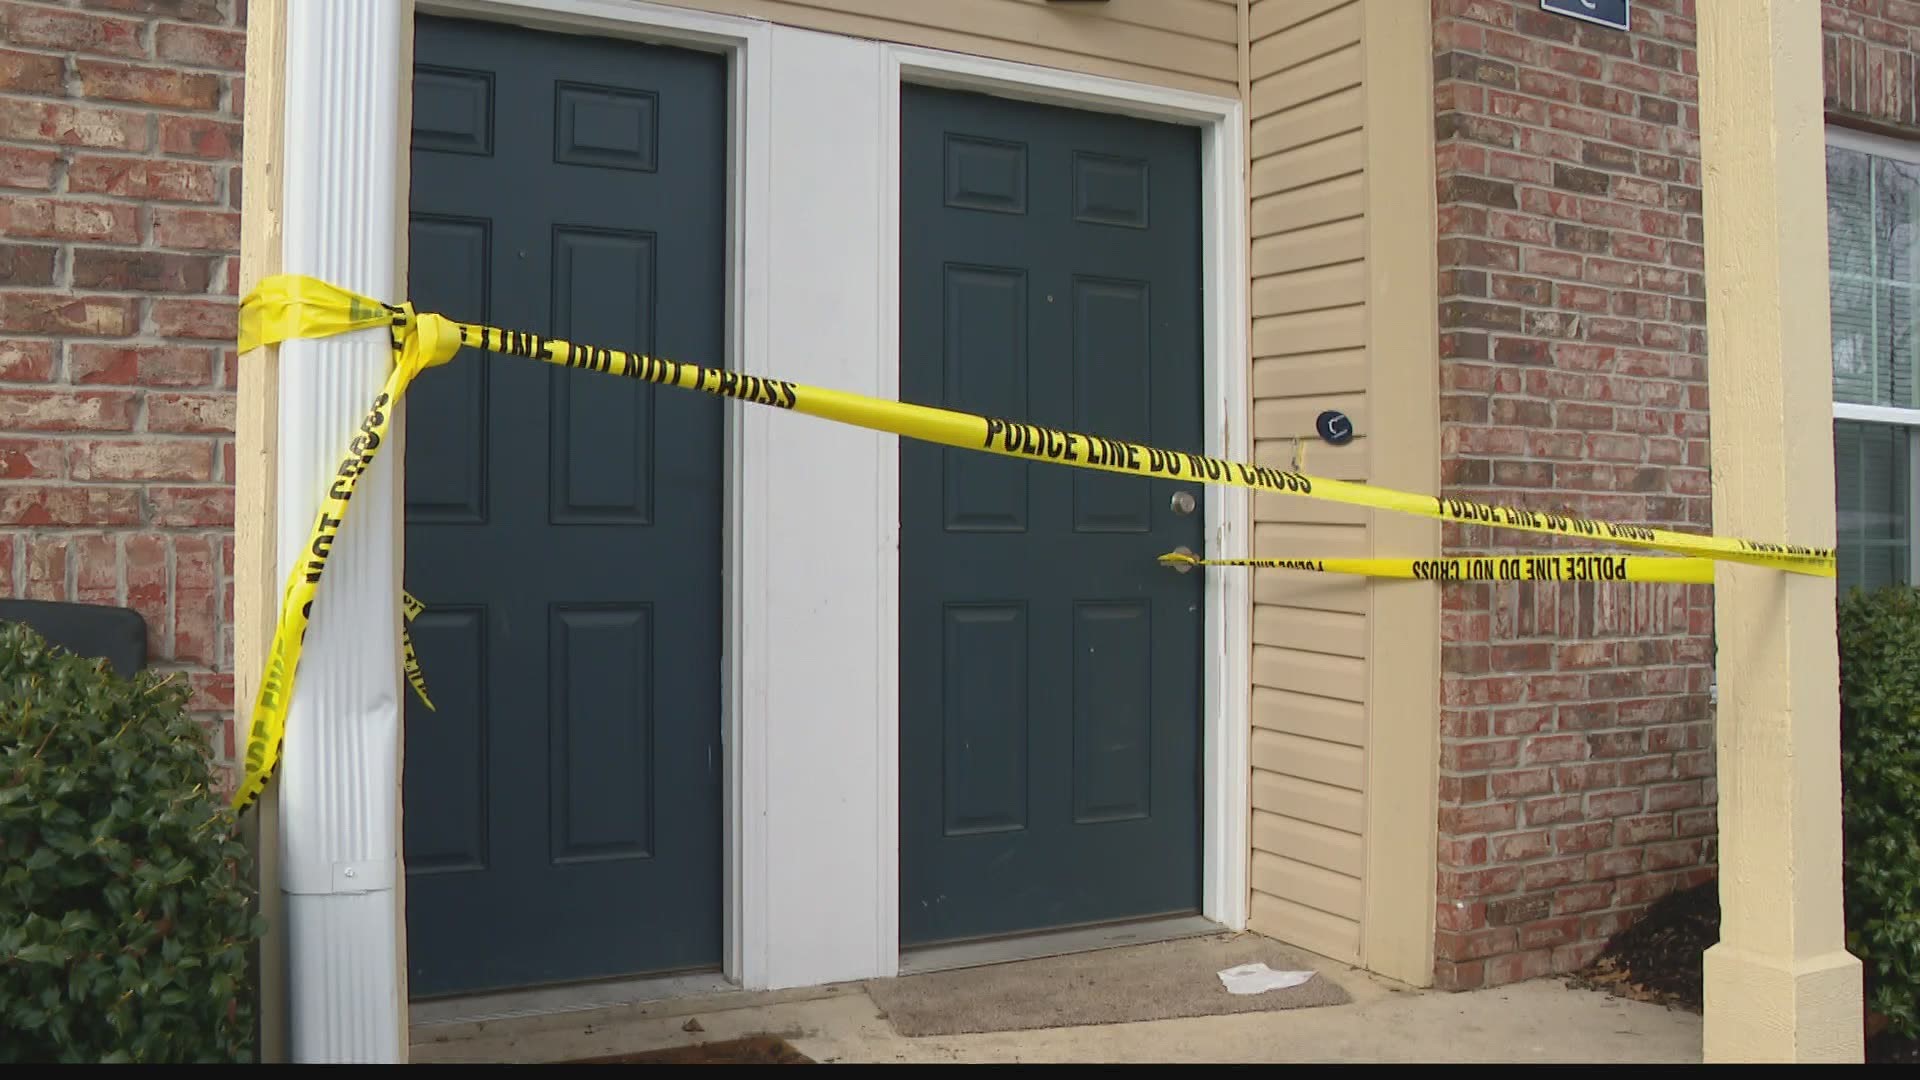 People living in an apartment complex in Bloomington are anxious to learn who murdered one of their neighbors.